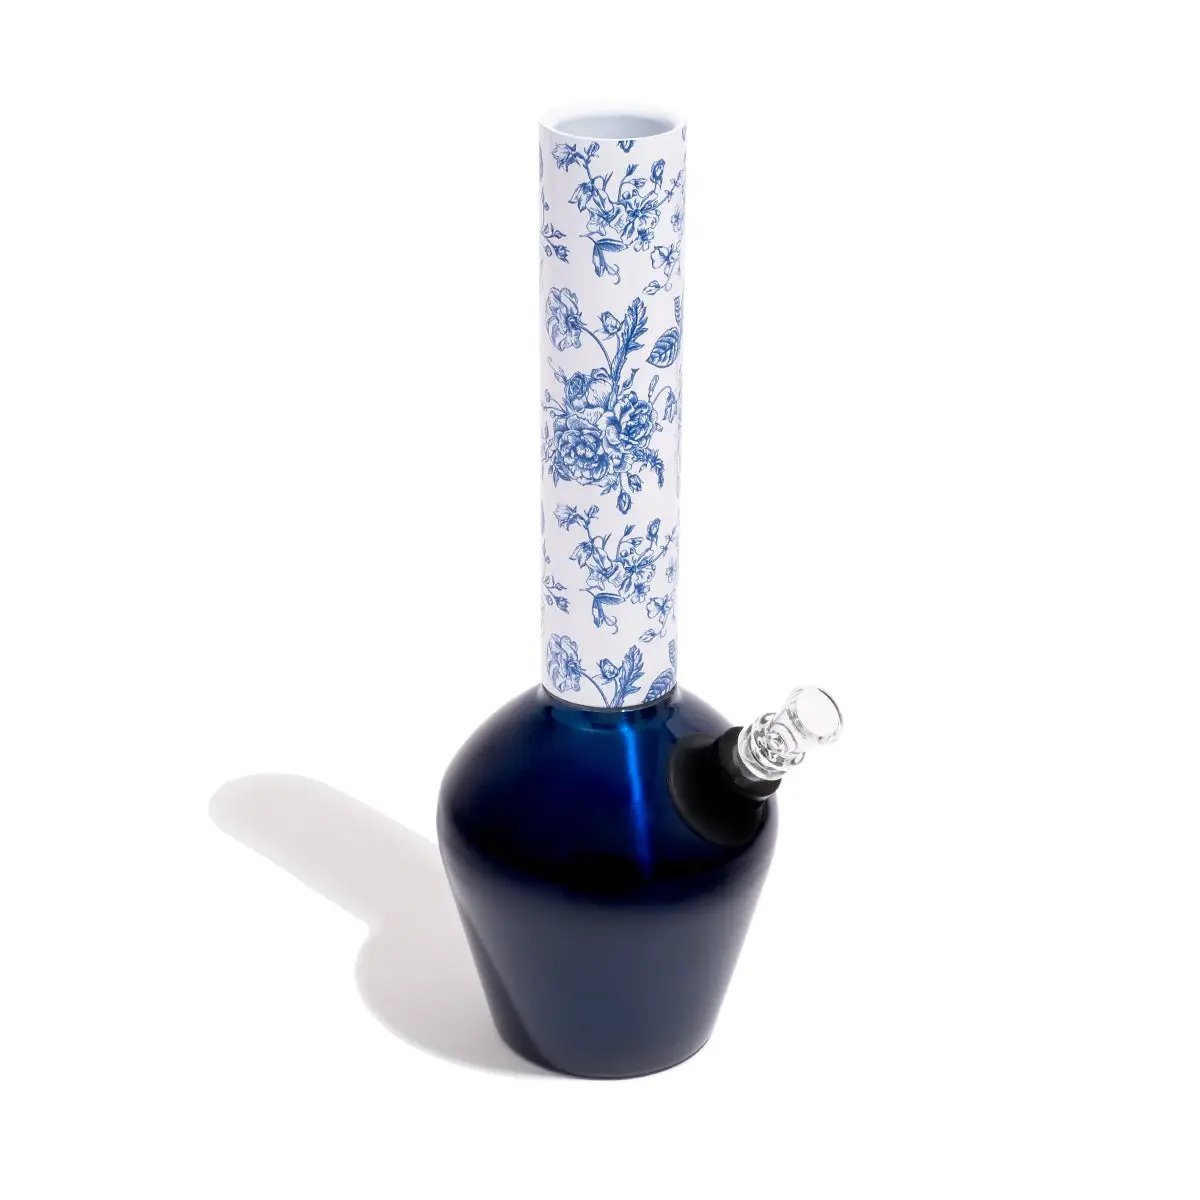 Chill - Mix & Match Series - Blue Floral Neckpiece by Chill Steel Pipes